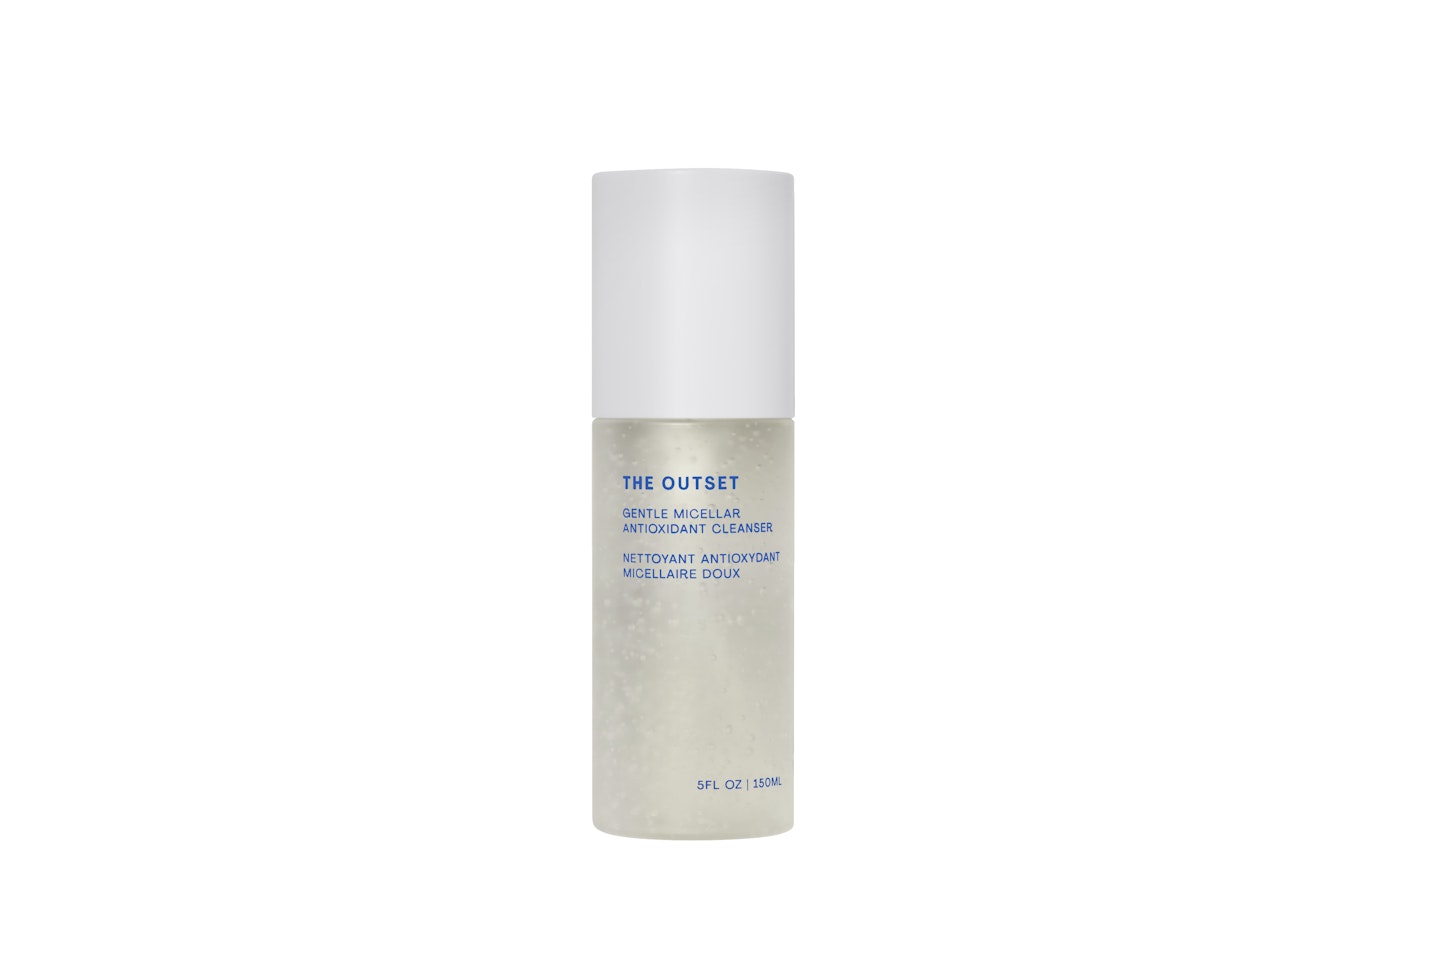 The Outset’s Gentle Micellar Antioxidant Cleanser 